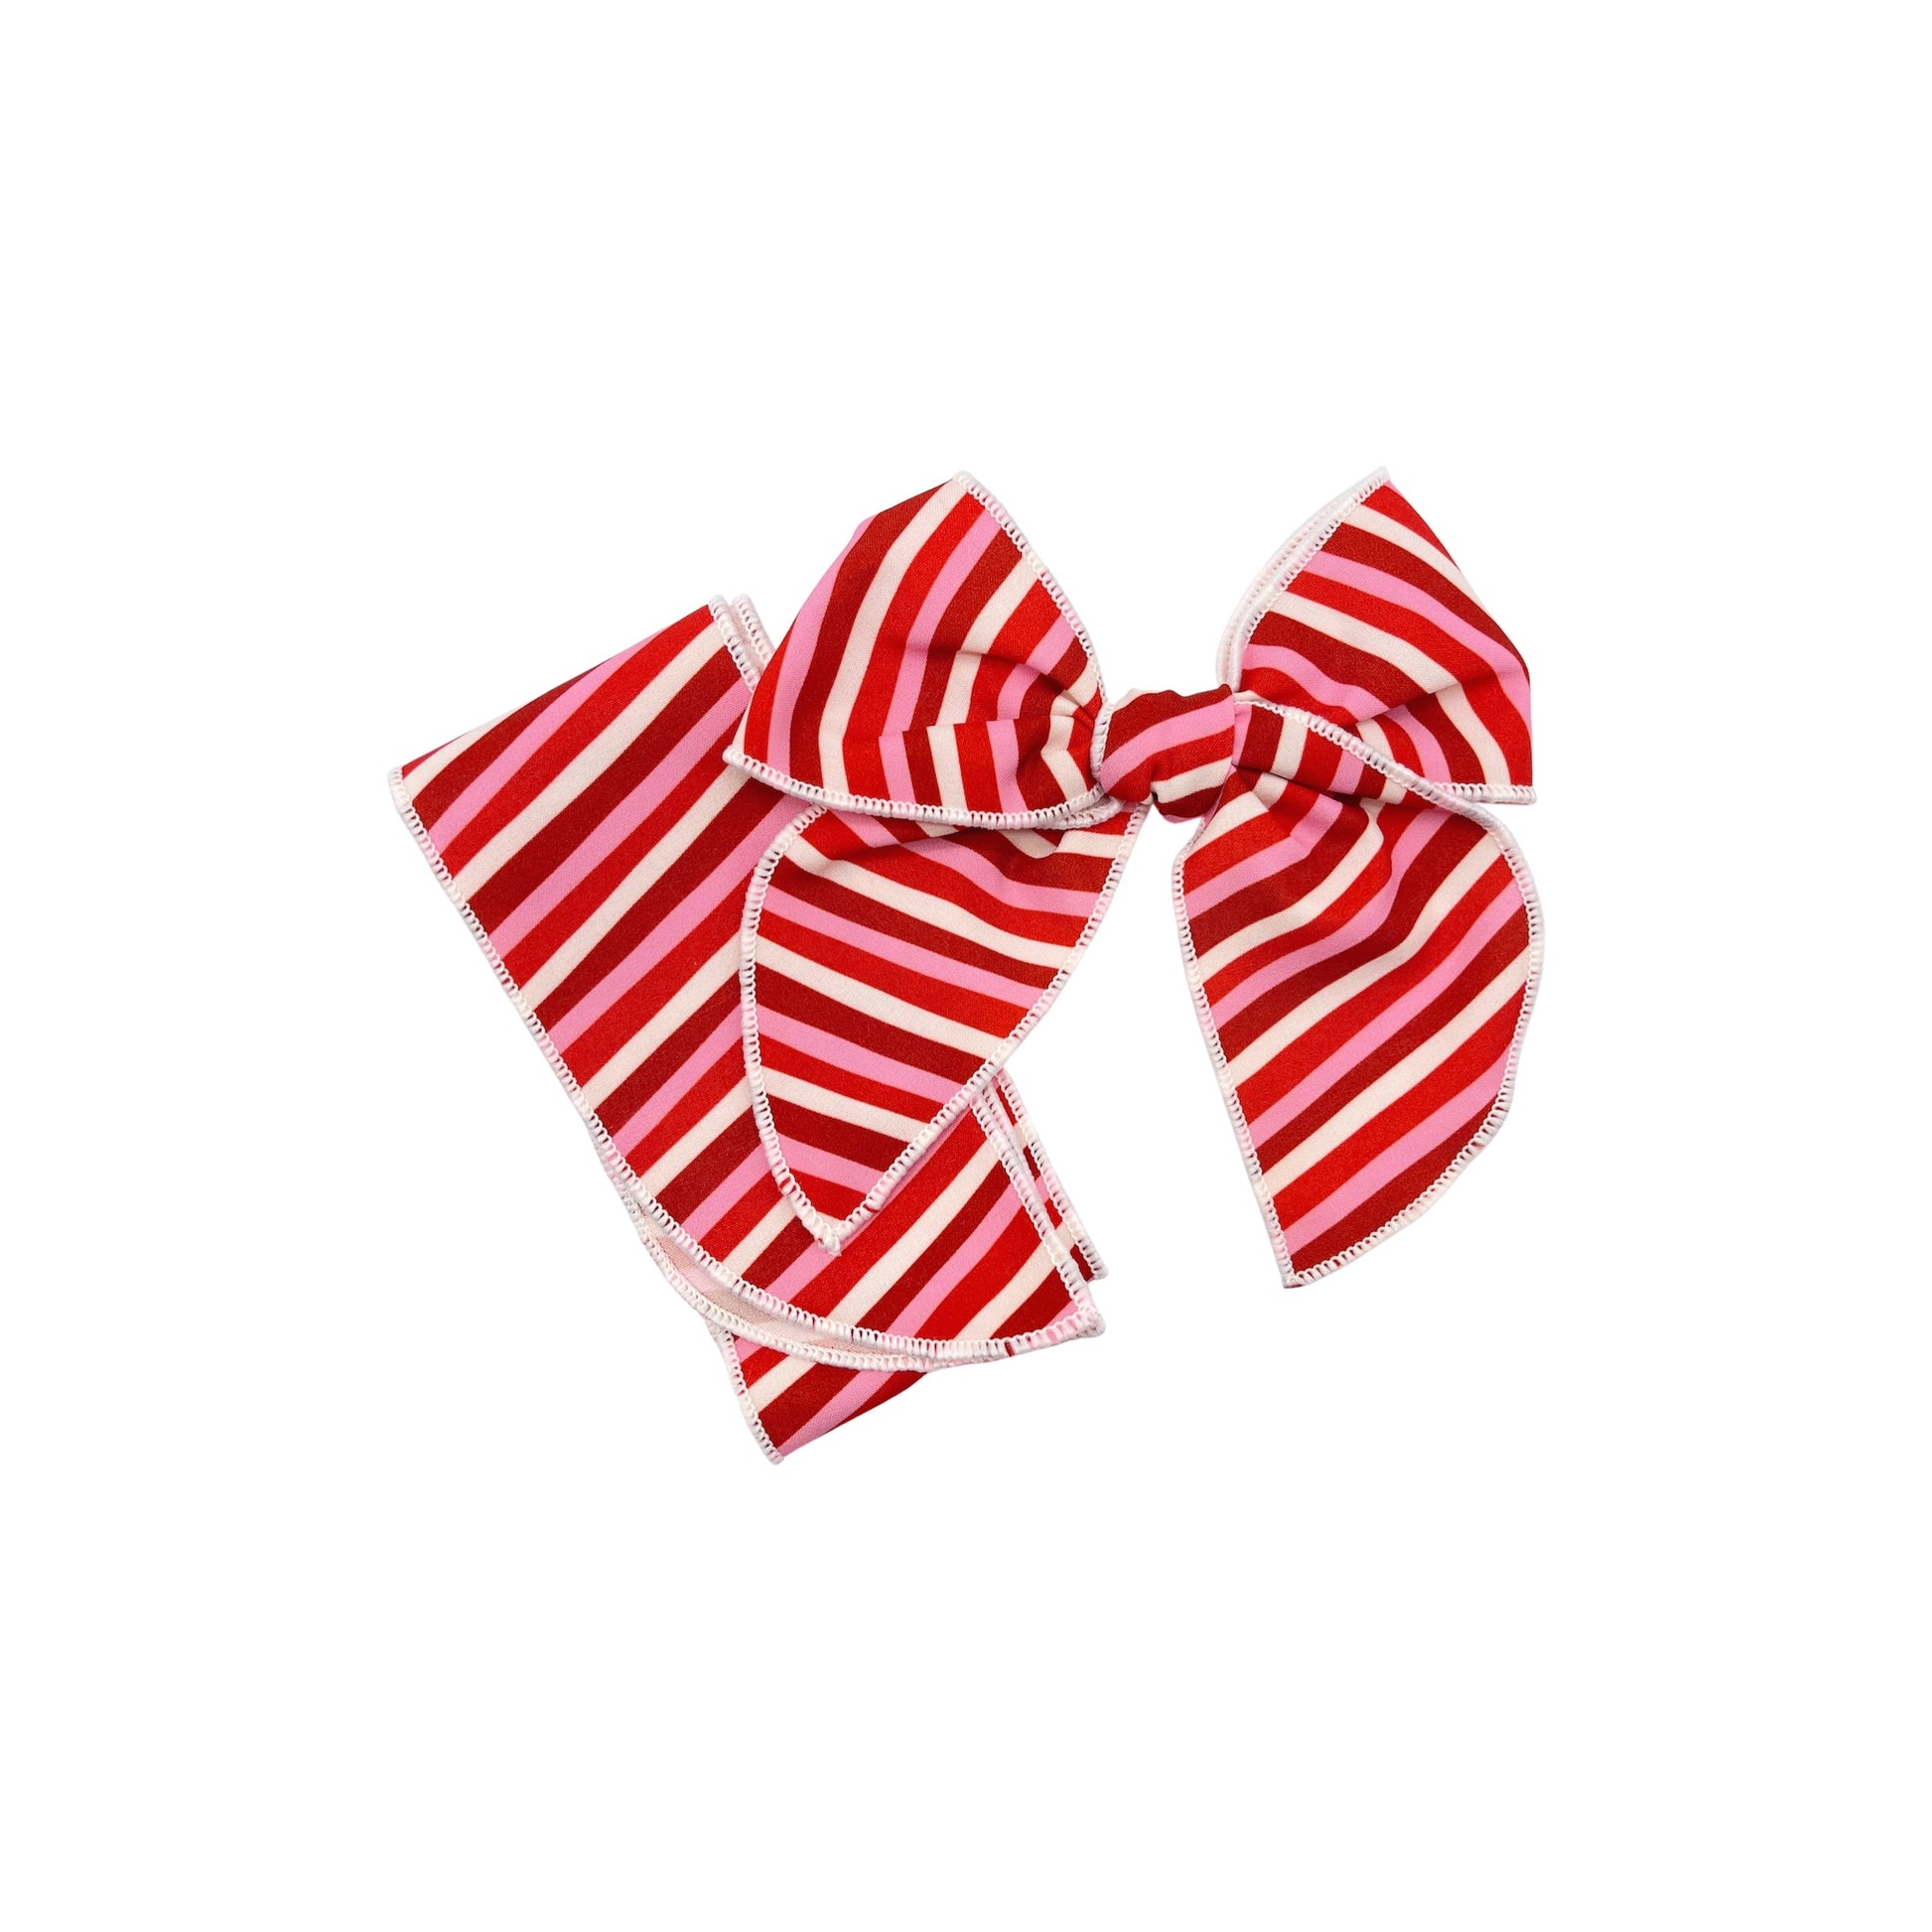 Tied and untied Isabelle style fabric bow strip with red and pink stripes pattern.